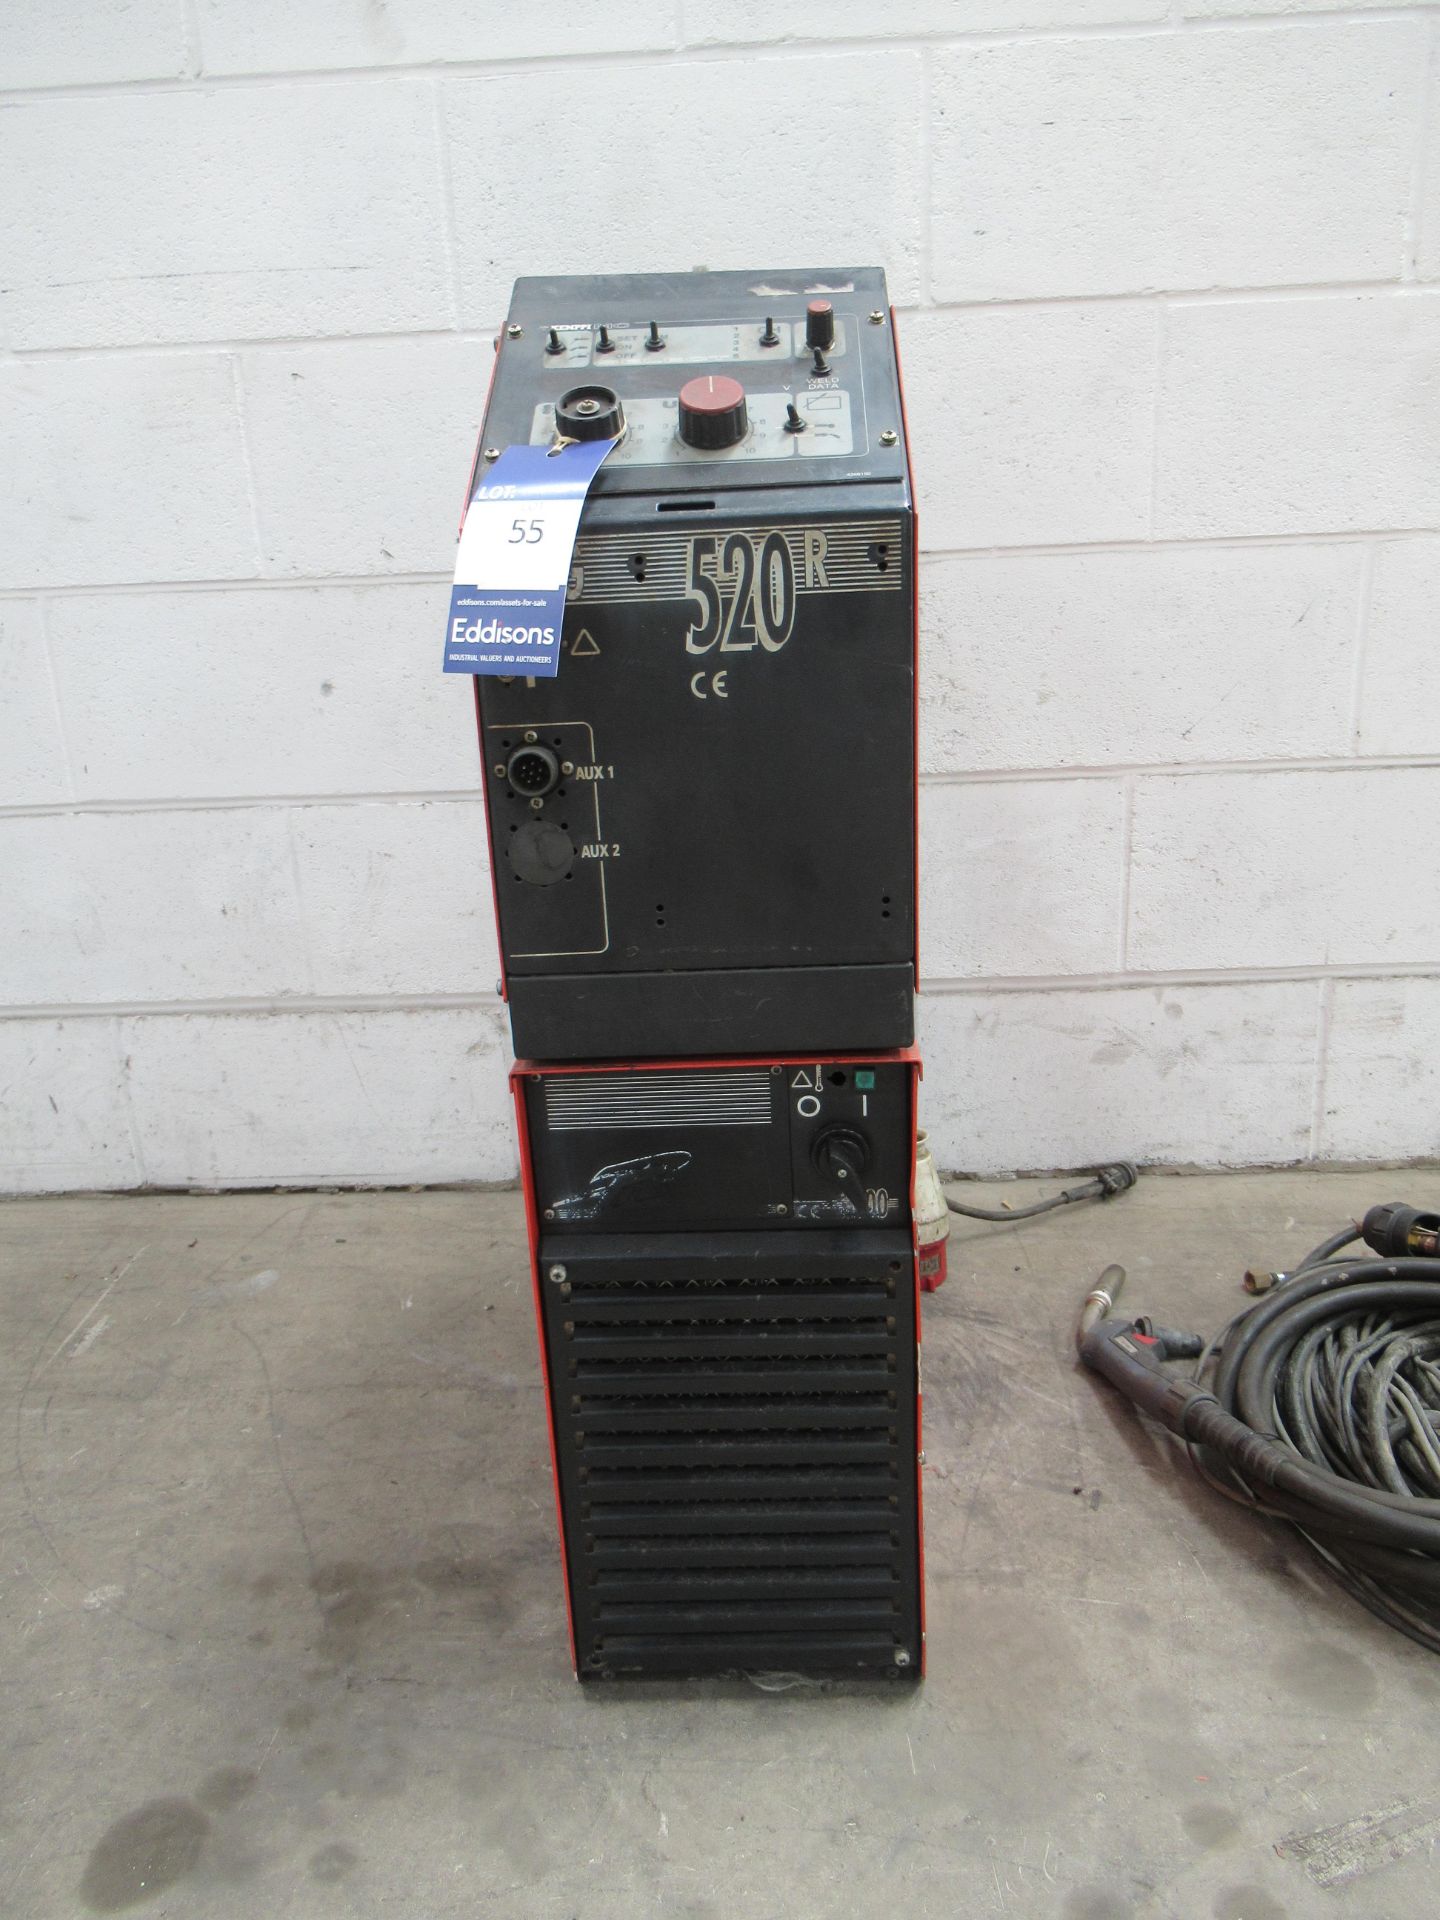 Kemppi MC Promig 520R welder with Kemppi Pro 3000 power source with torch